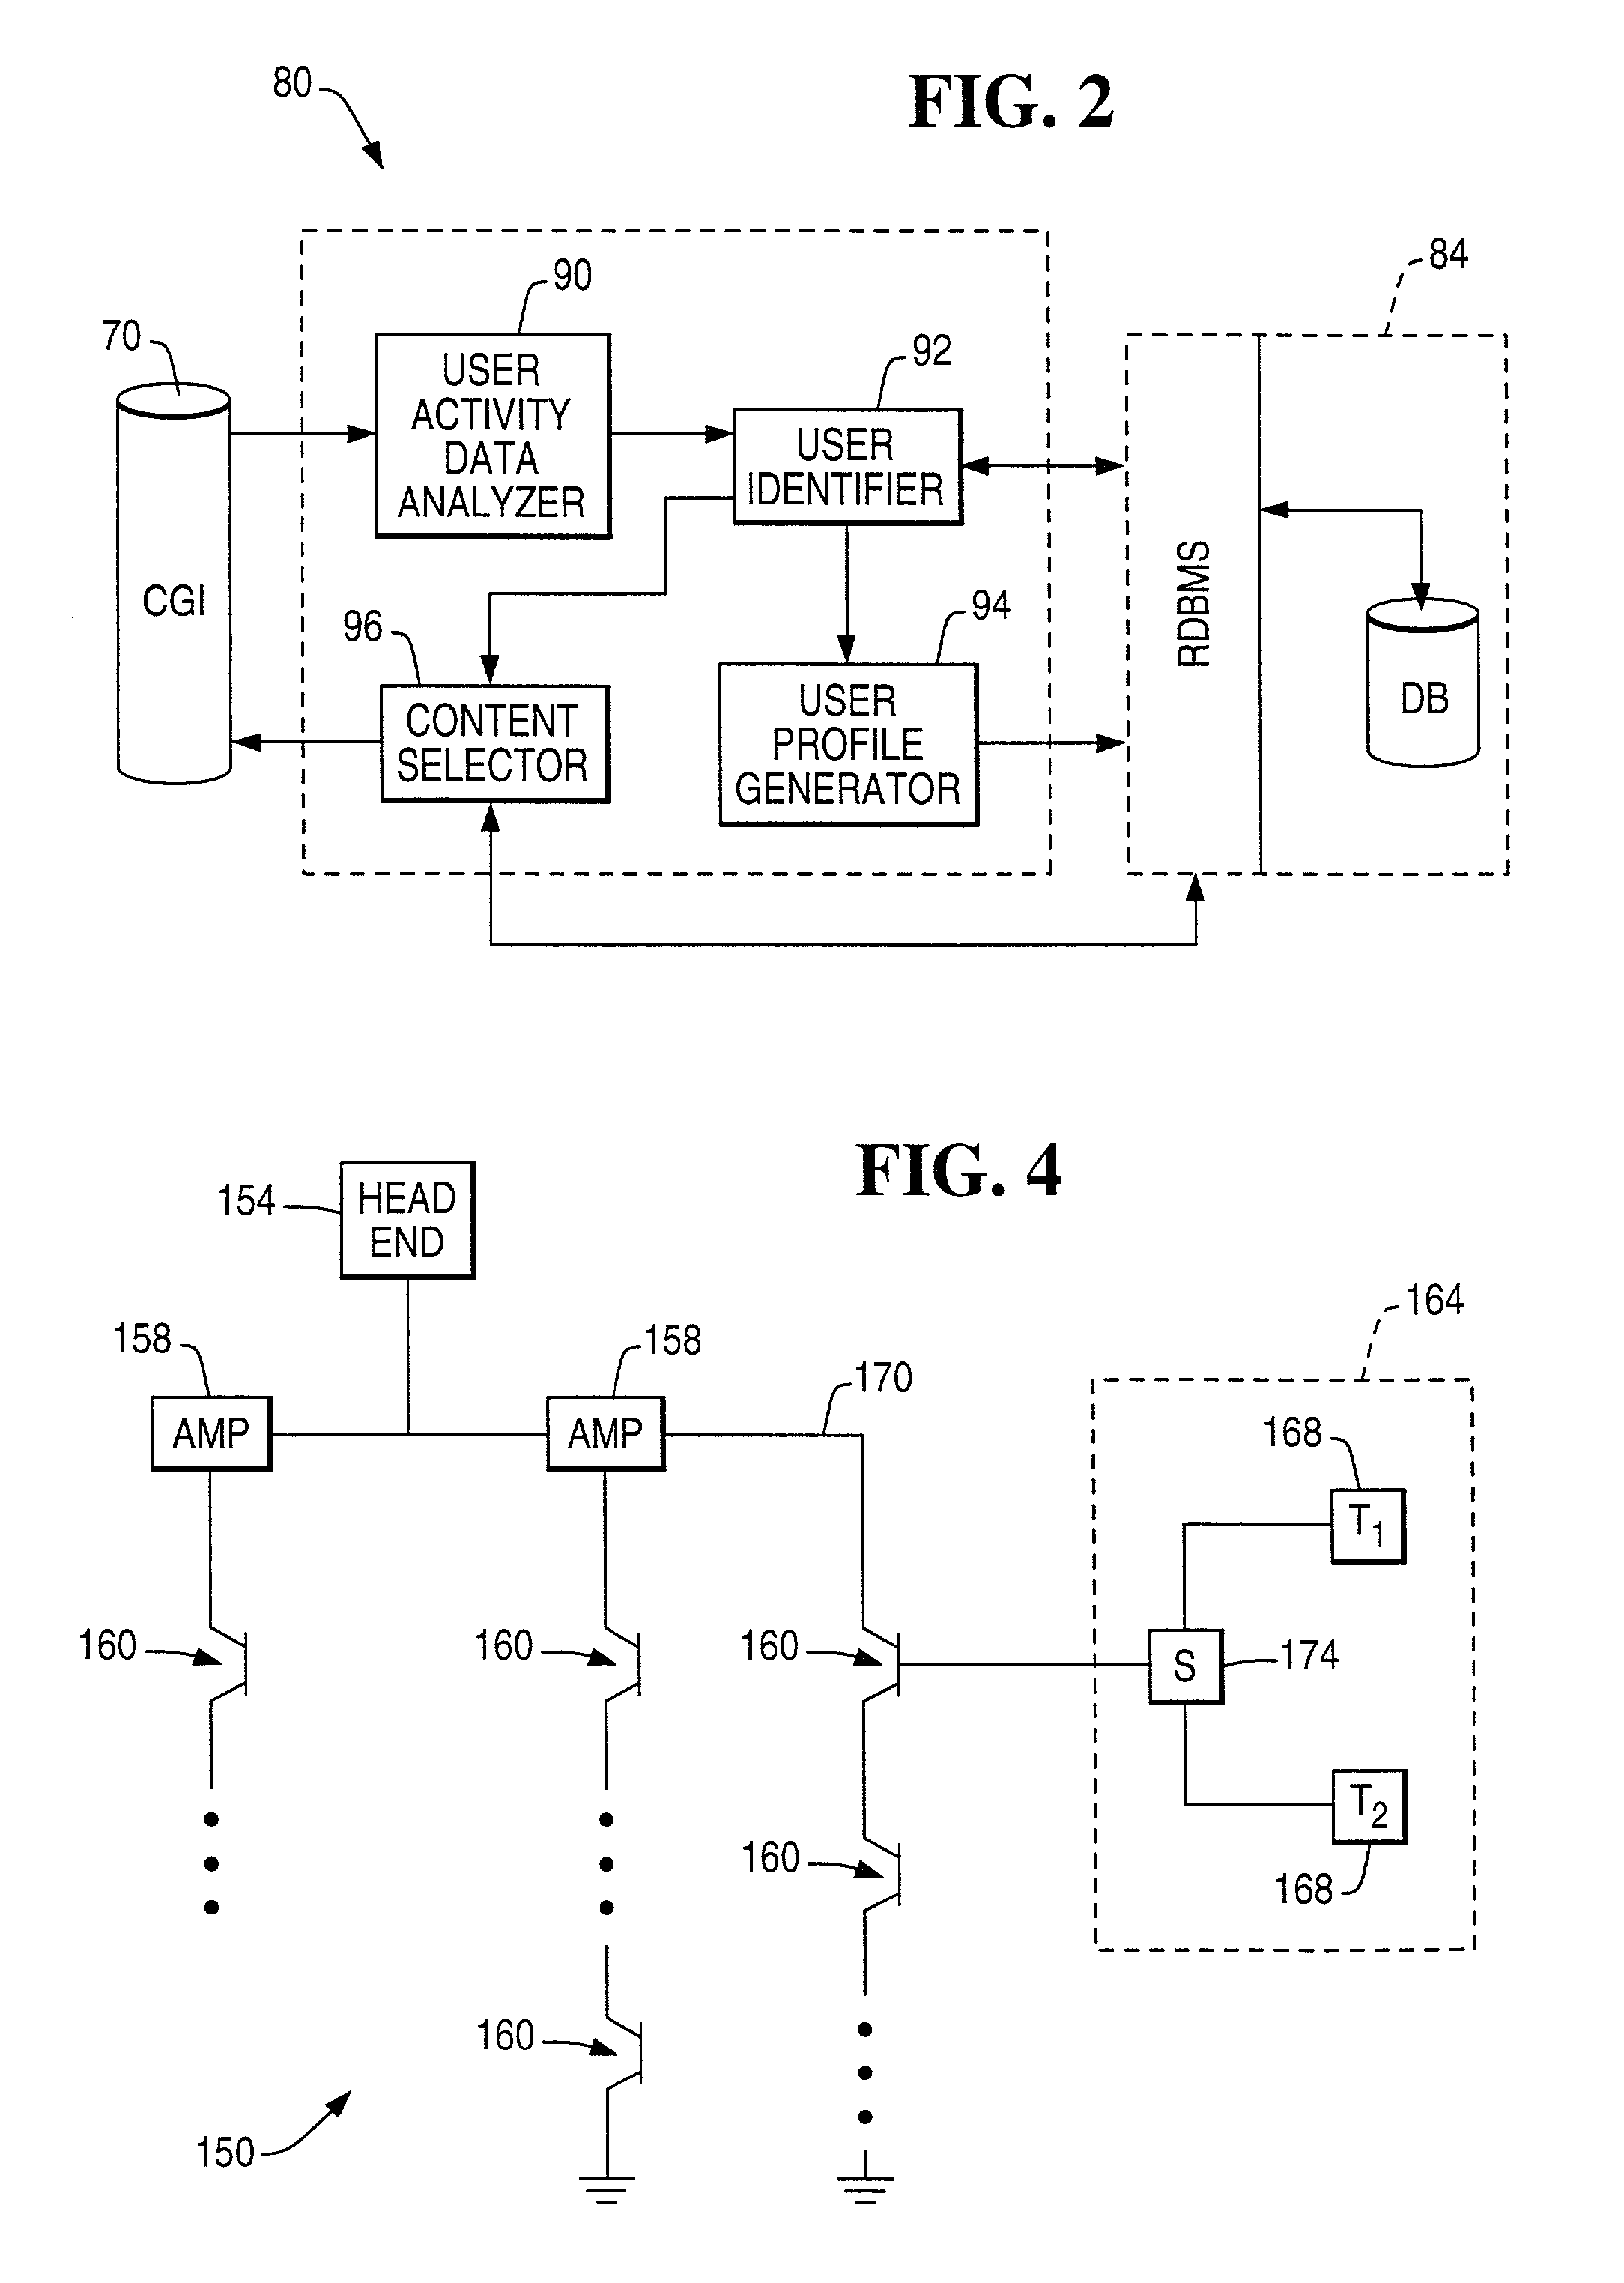 System and method for profiling different users having a common computer identifier